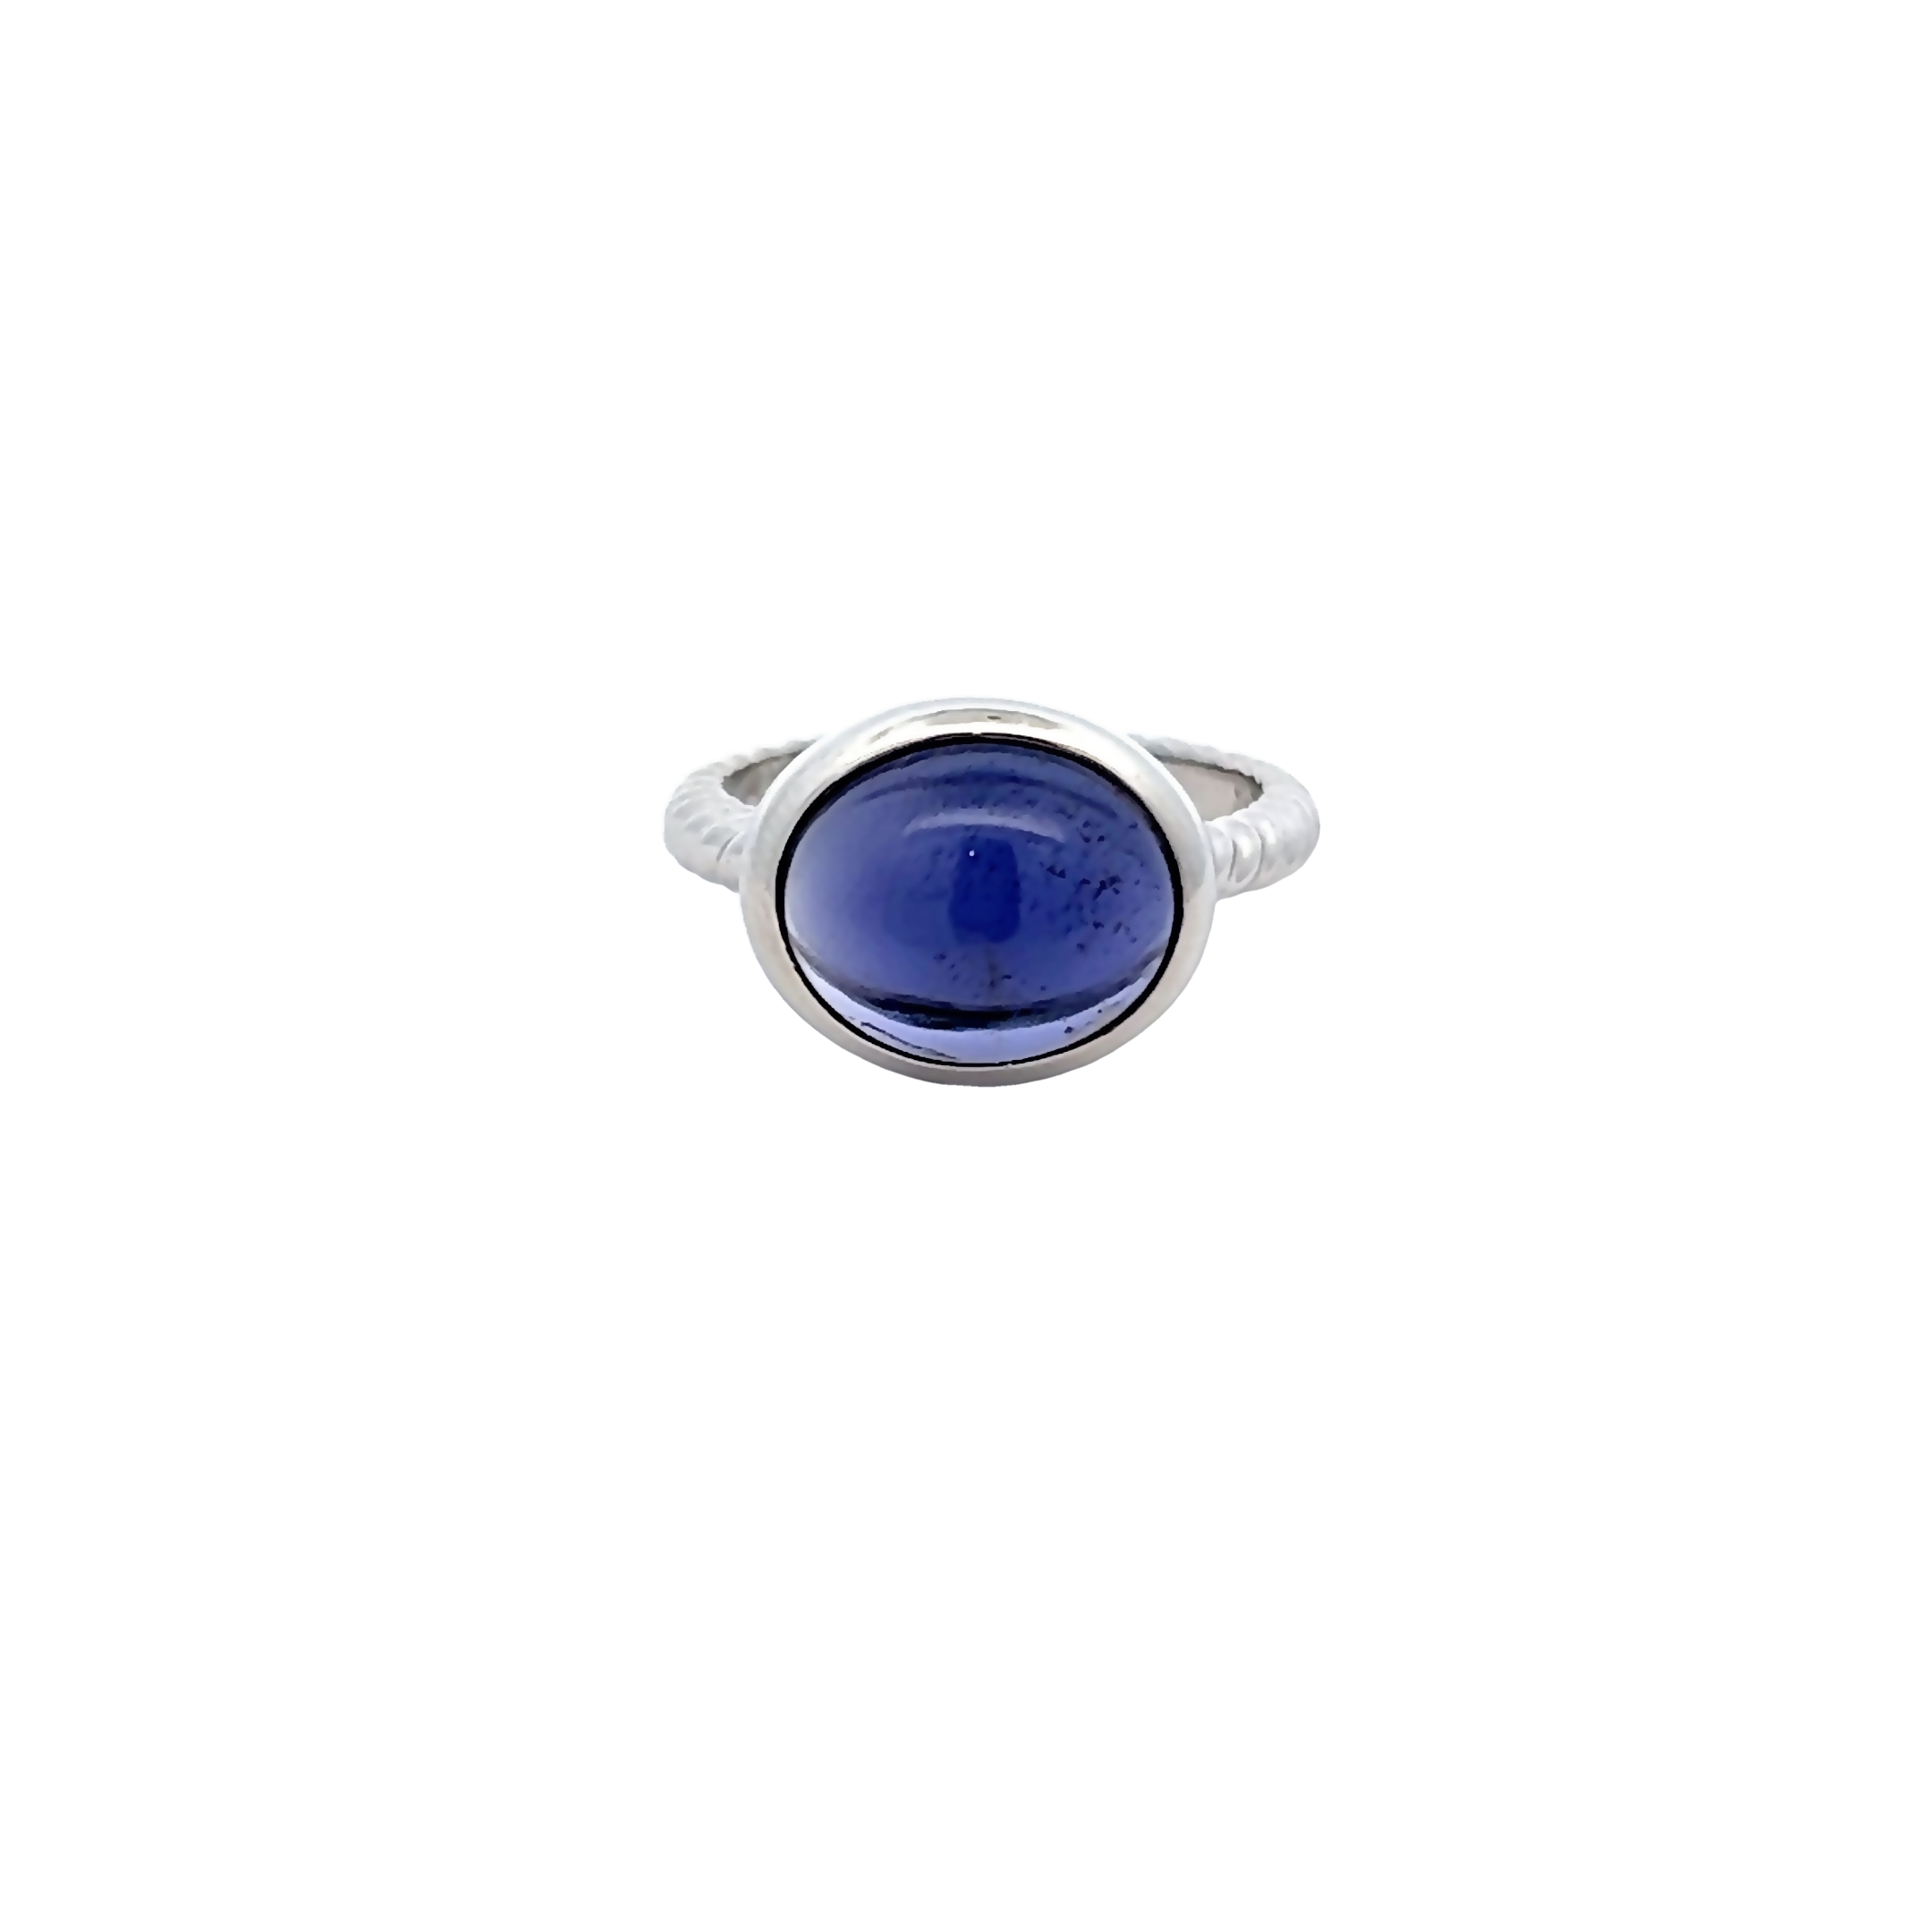 14 Karat white gold ring with One 4.50Ct cabochon Iolite. Size 6.75